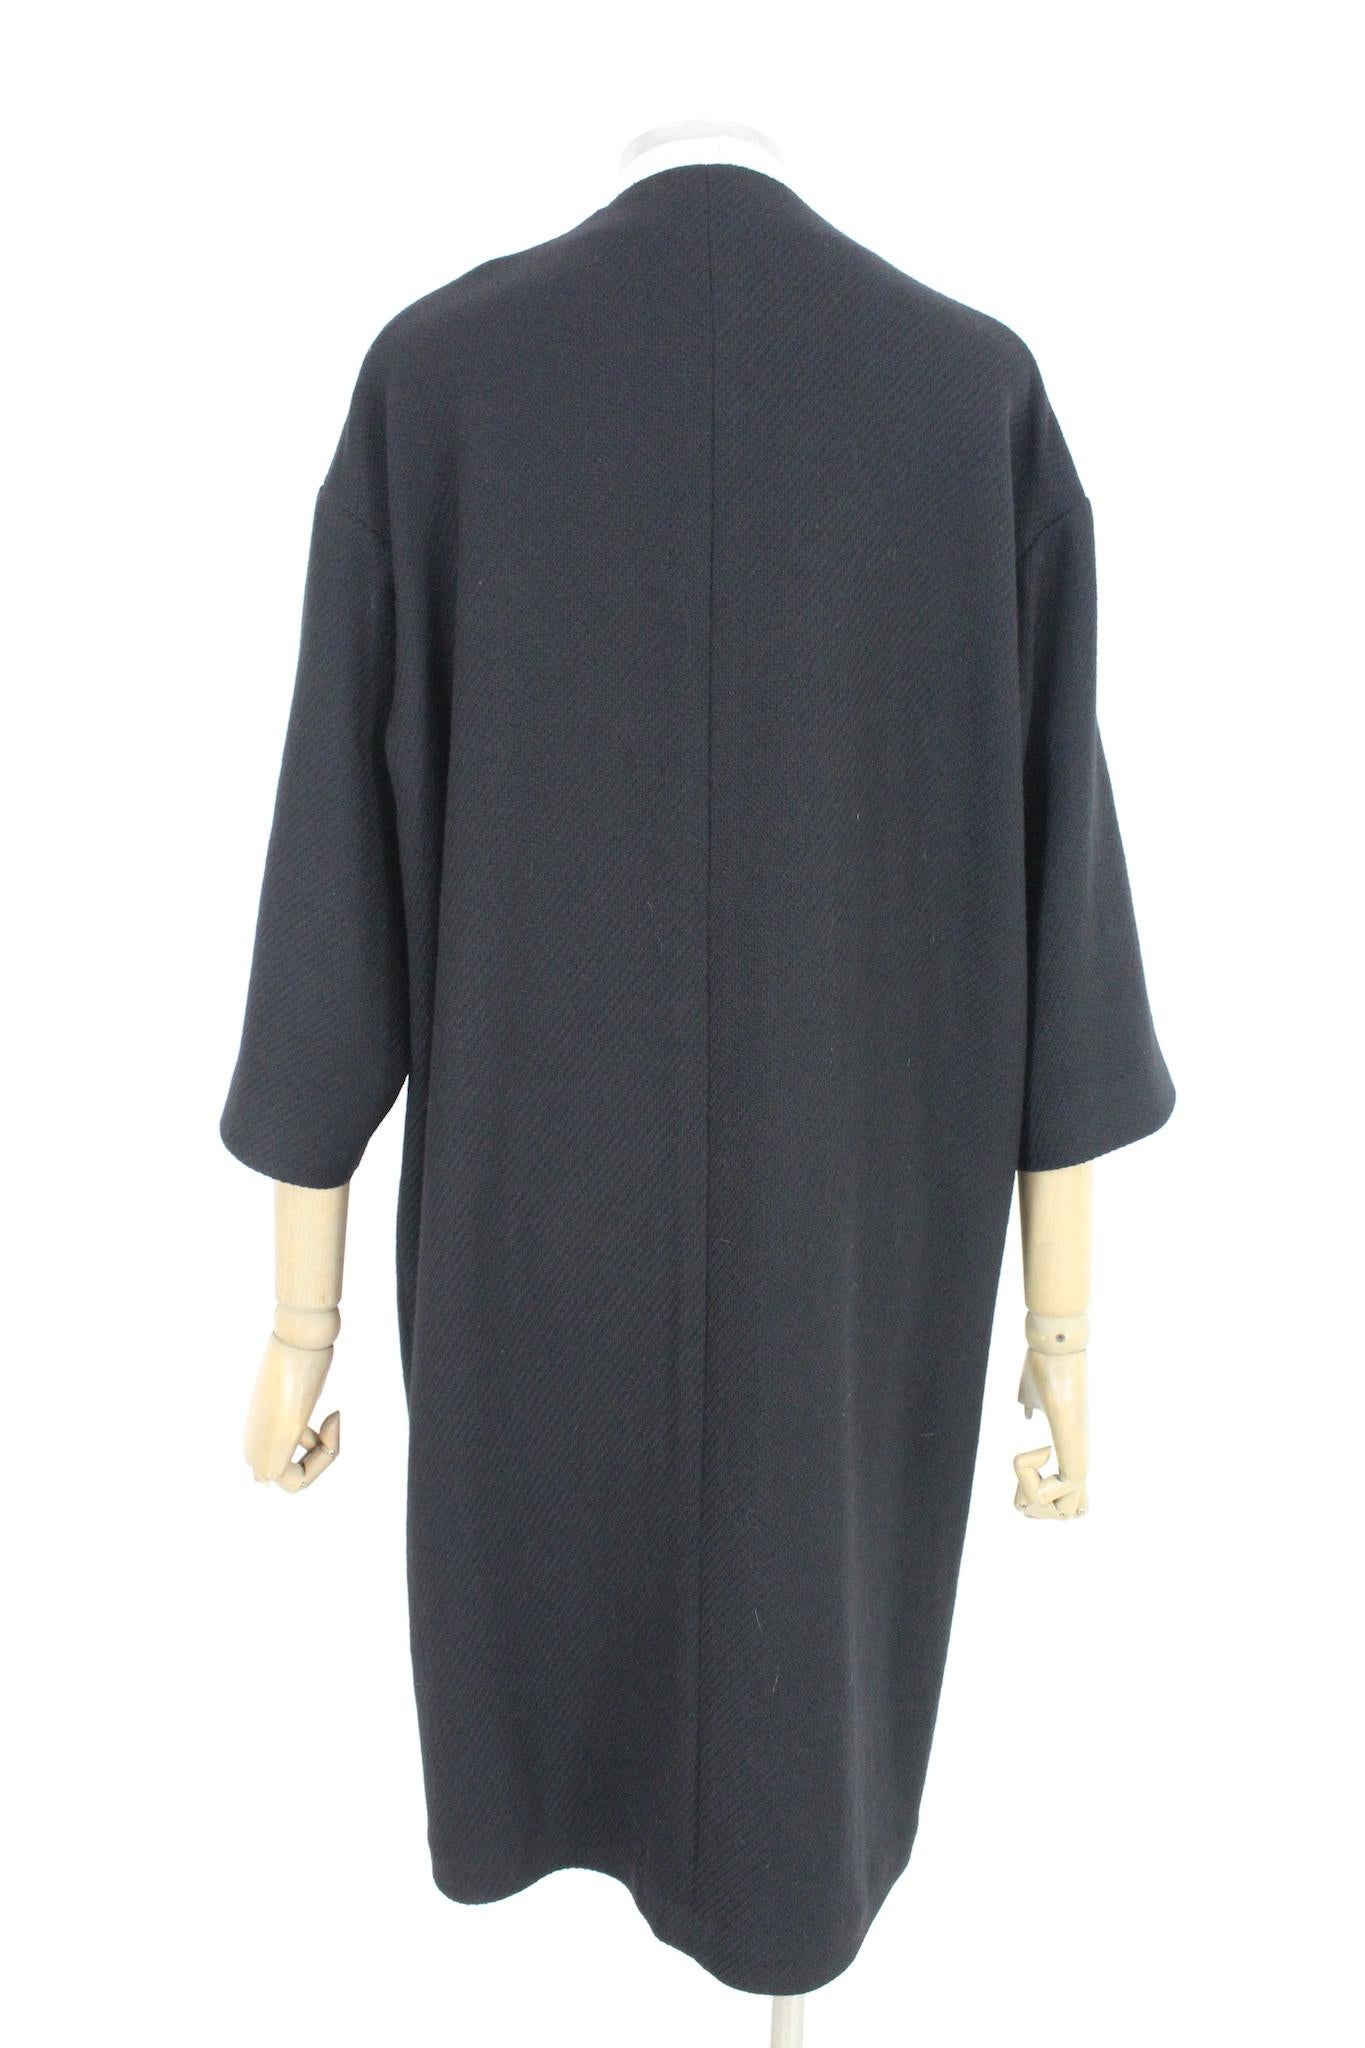 Laura Urbinati classic black coat from the 2000s. Straight model, round neck, tone-on-tone herringbone pattern, clip button closure, internally unlined. 100% virgin wool fabric. Made in Italy.

Size: 40 It 6 Us 8 Uk

Shoulder: 40 cm
Bust/Chest: 56